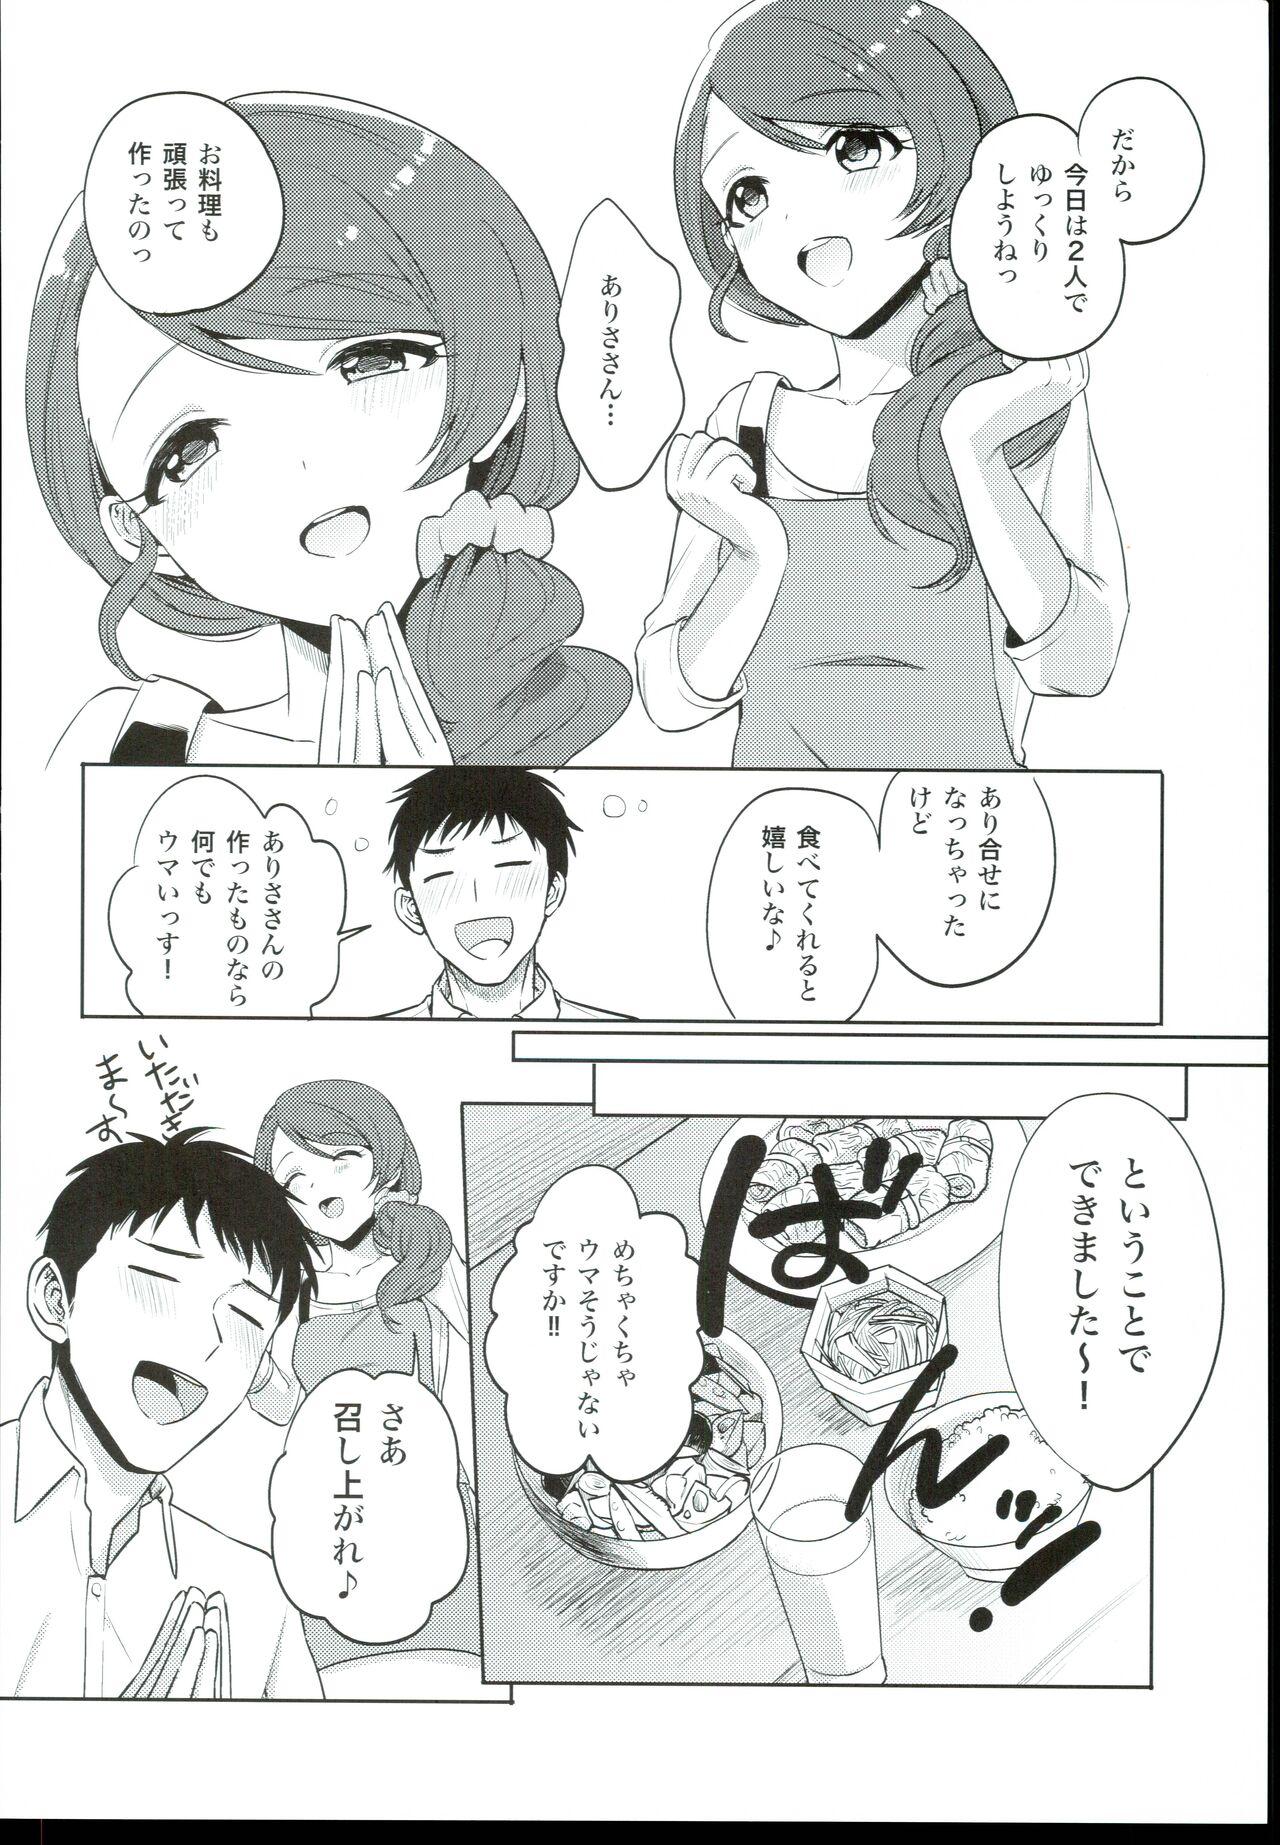 Show Onegai! Arisa-Tente - The idolmaster Hairypussy - Page 6